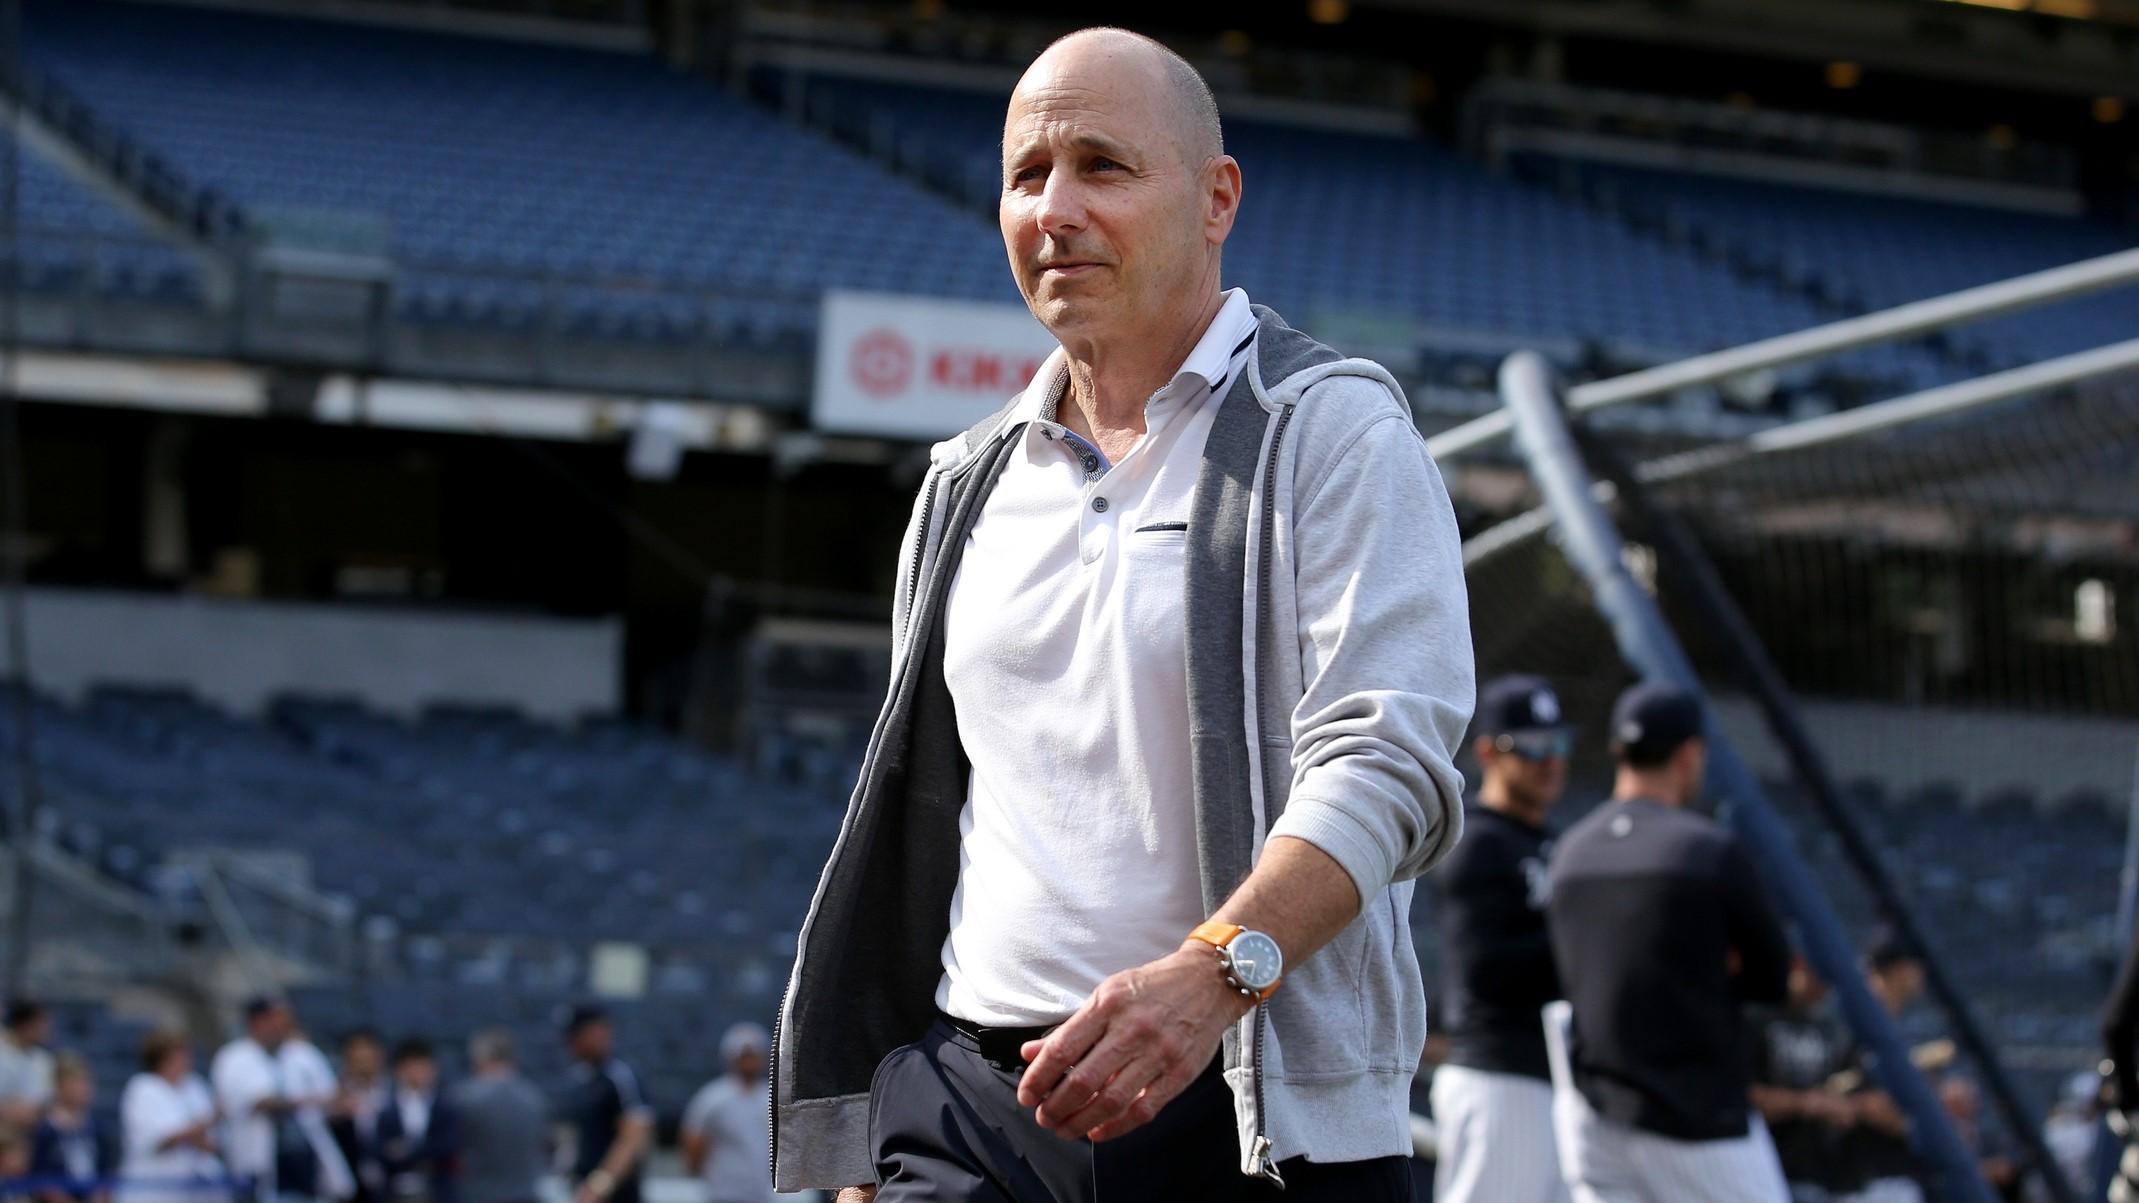 Jun 20, 2023; Bronx, New York, USA; New York Yankees general manager Brian Cashman on the field during batting practice before a game against the Seattle Mariners at Yankee Stadium. / Brad Penner-USA TODAY Sports